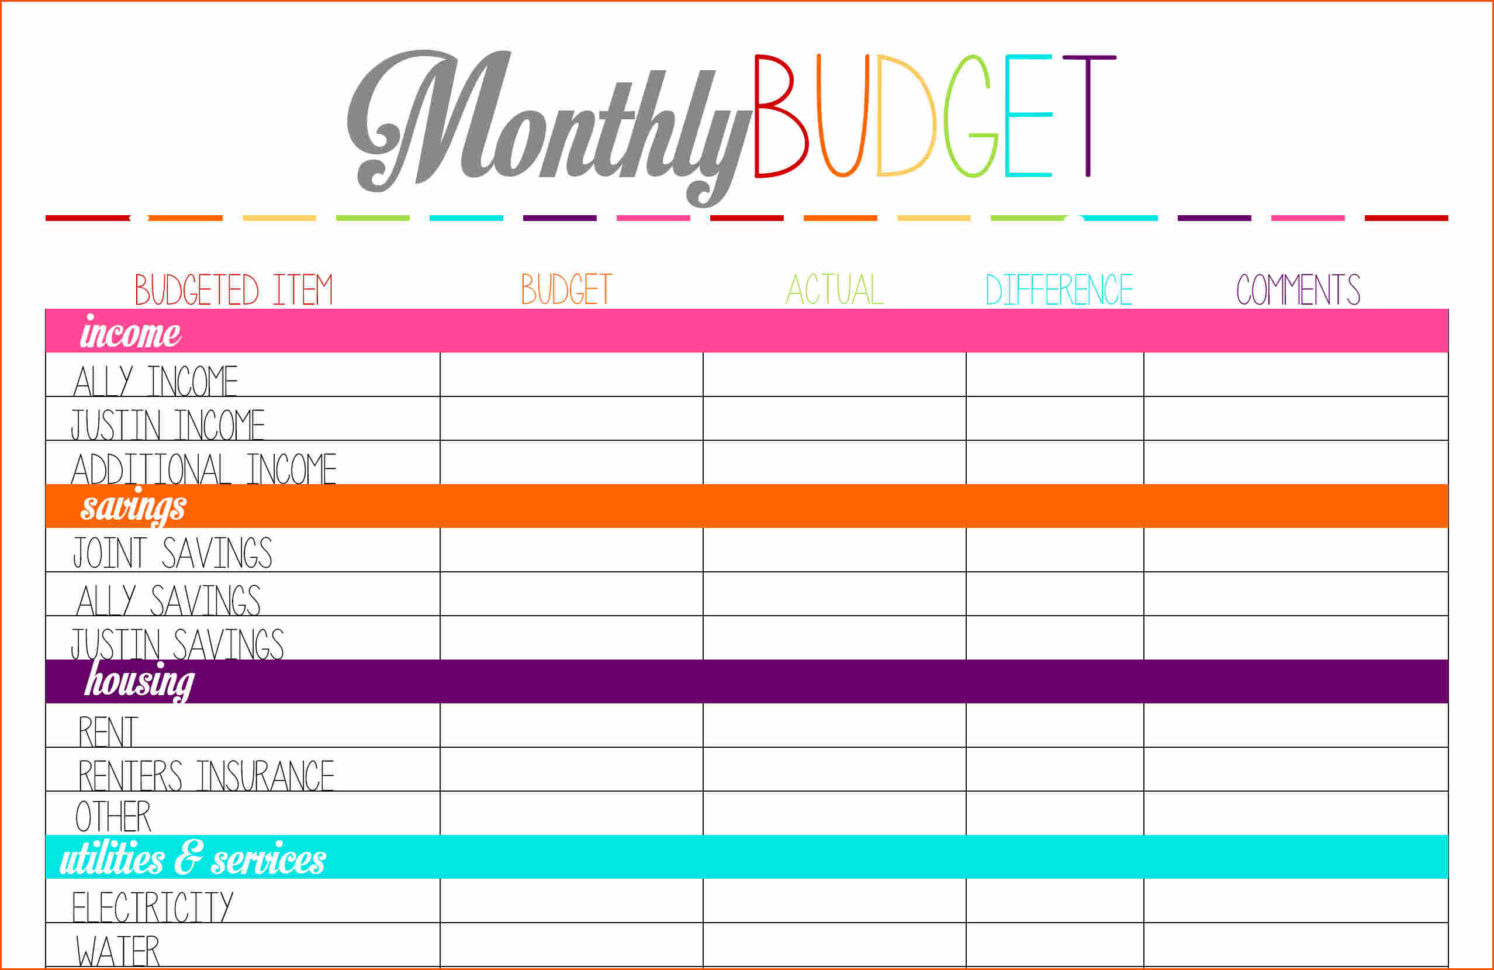 excel spreadsheet for personal budget